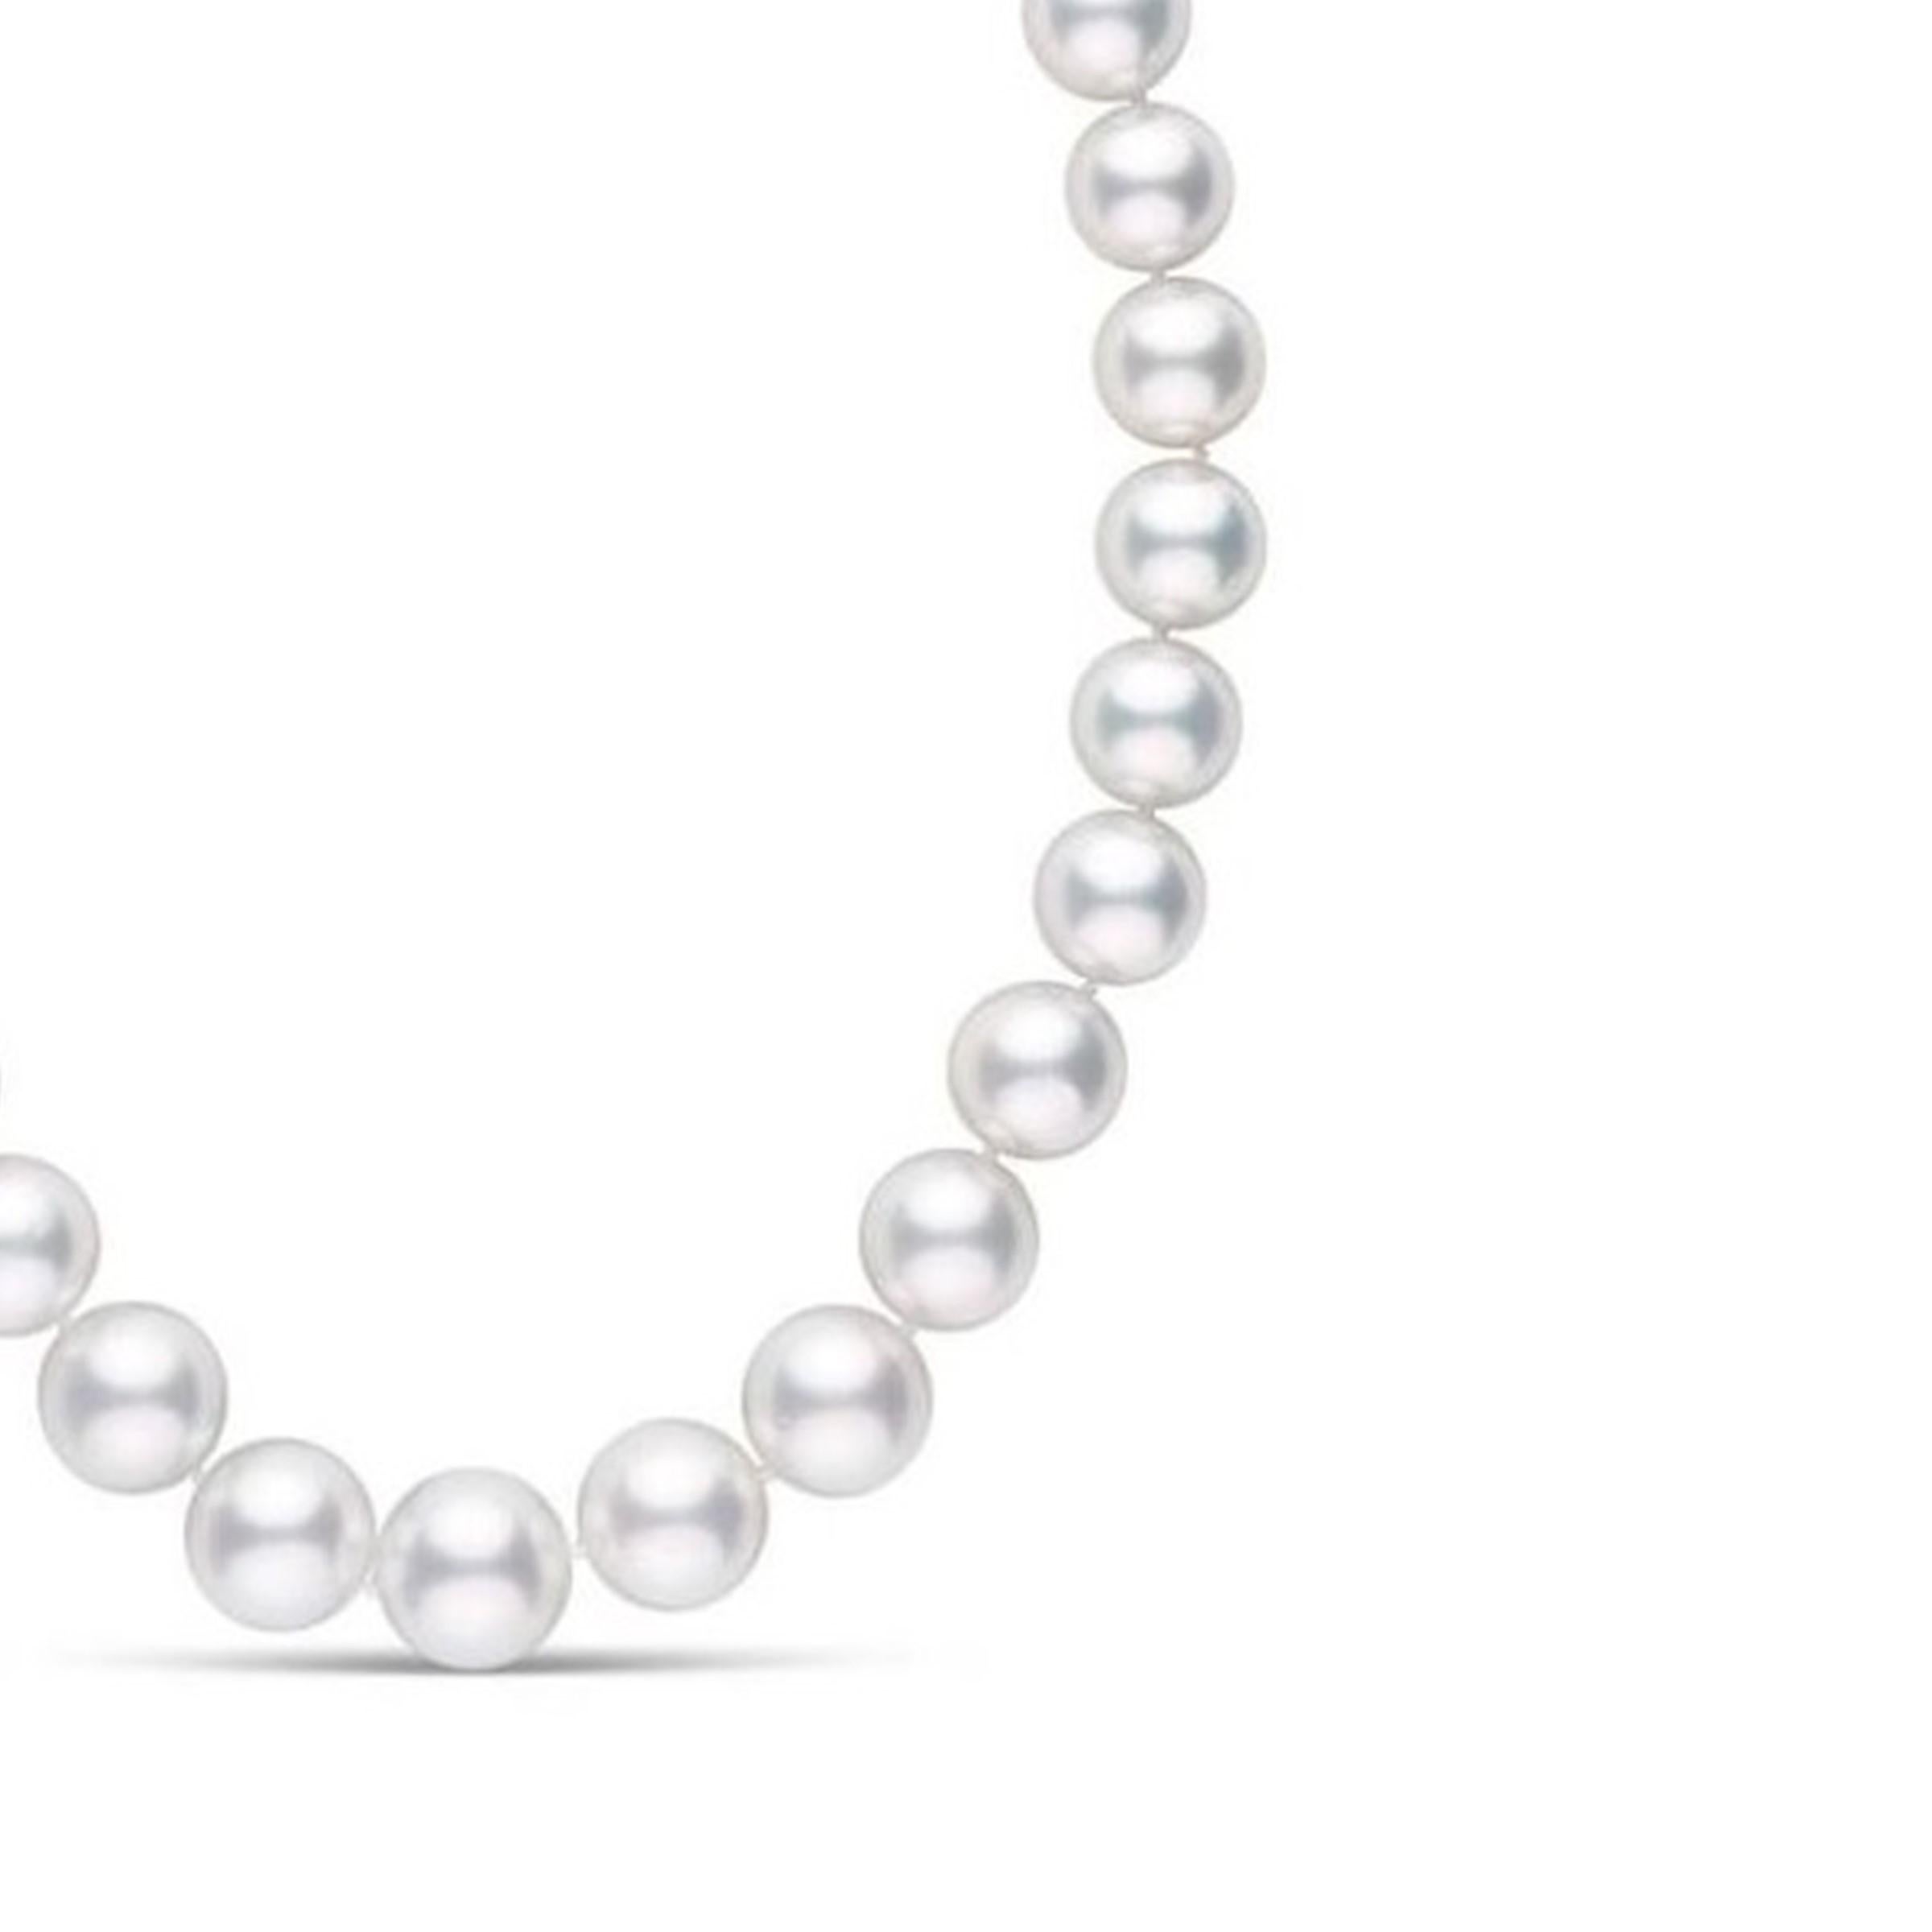 This exquisite South Sea pearl necklace features 11.0-13.0mm, AAA quality pearls hand-picked for their radiant luster. 
This princess length necklace comes packaged in a beautiful jewelry gift box. Just perfect for your next momentous